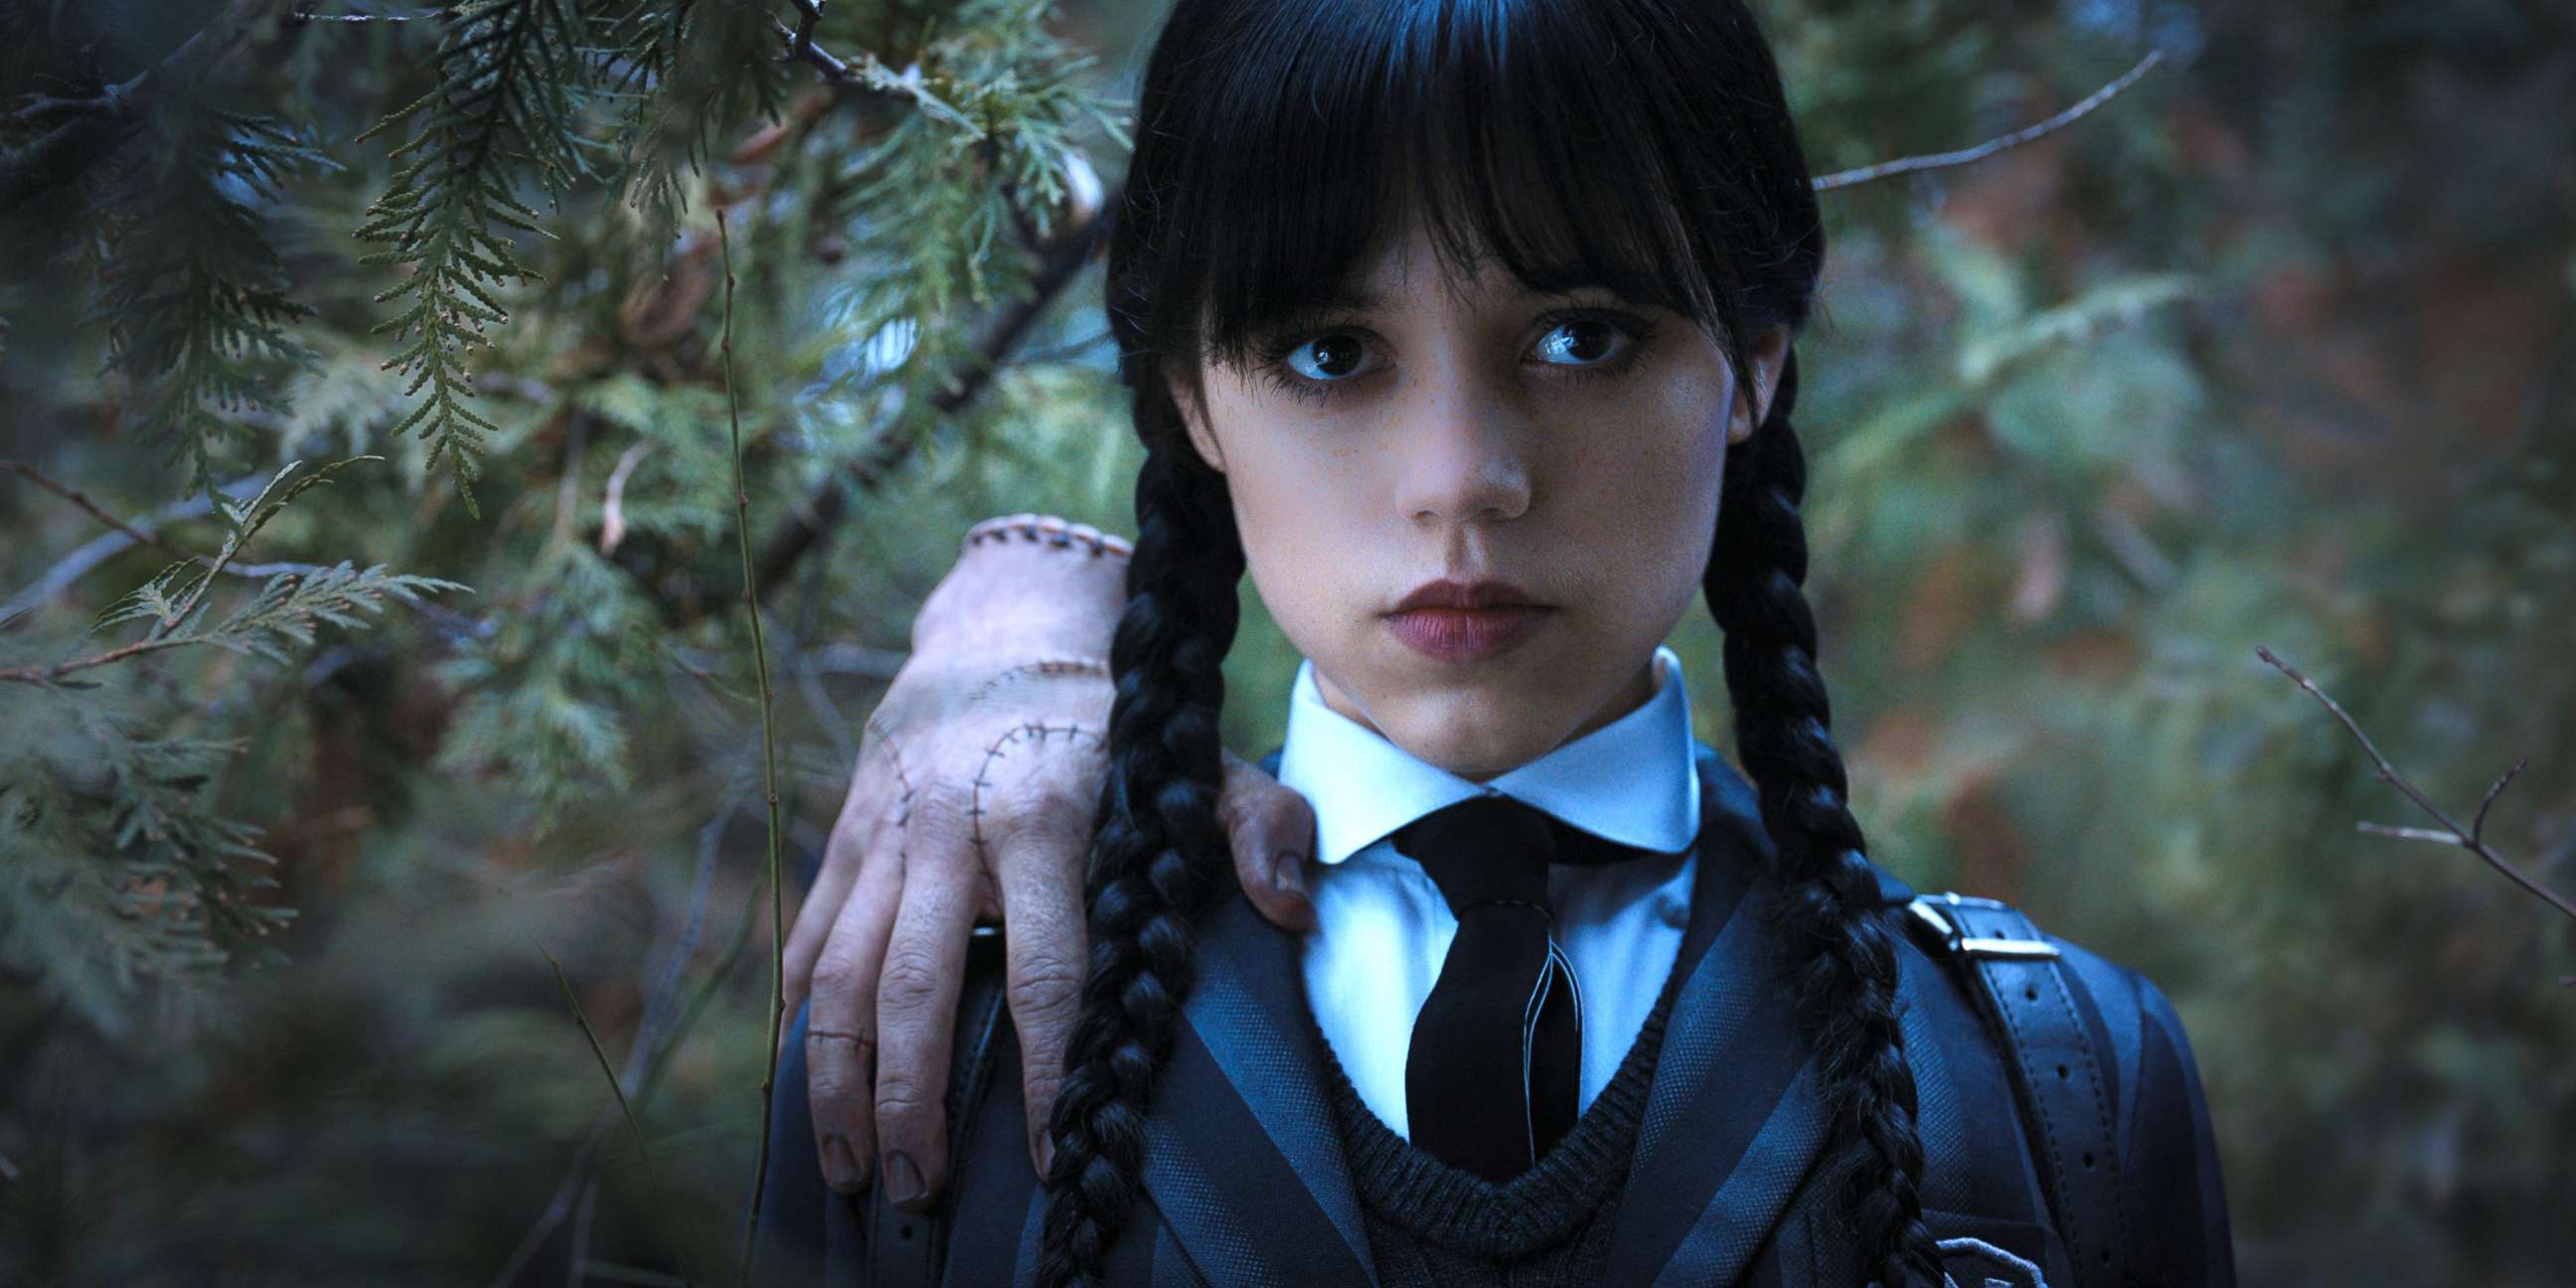 PHOTO: Jenna Ortega as Wednesday Addams pictured with Thing in a still from the show "Wednesday."